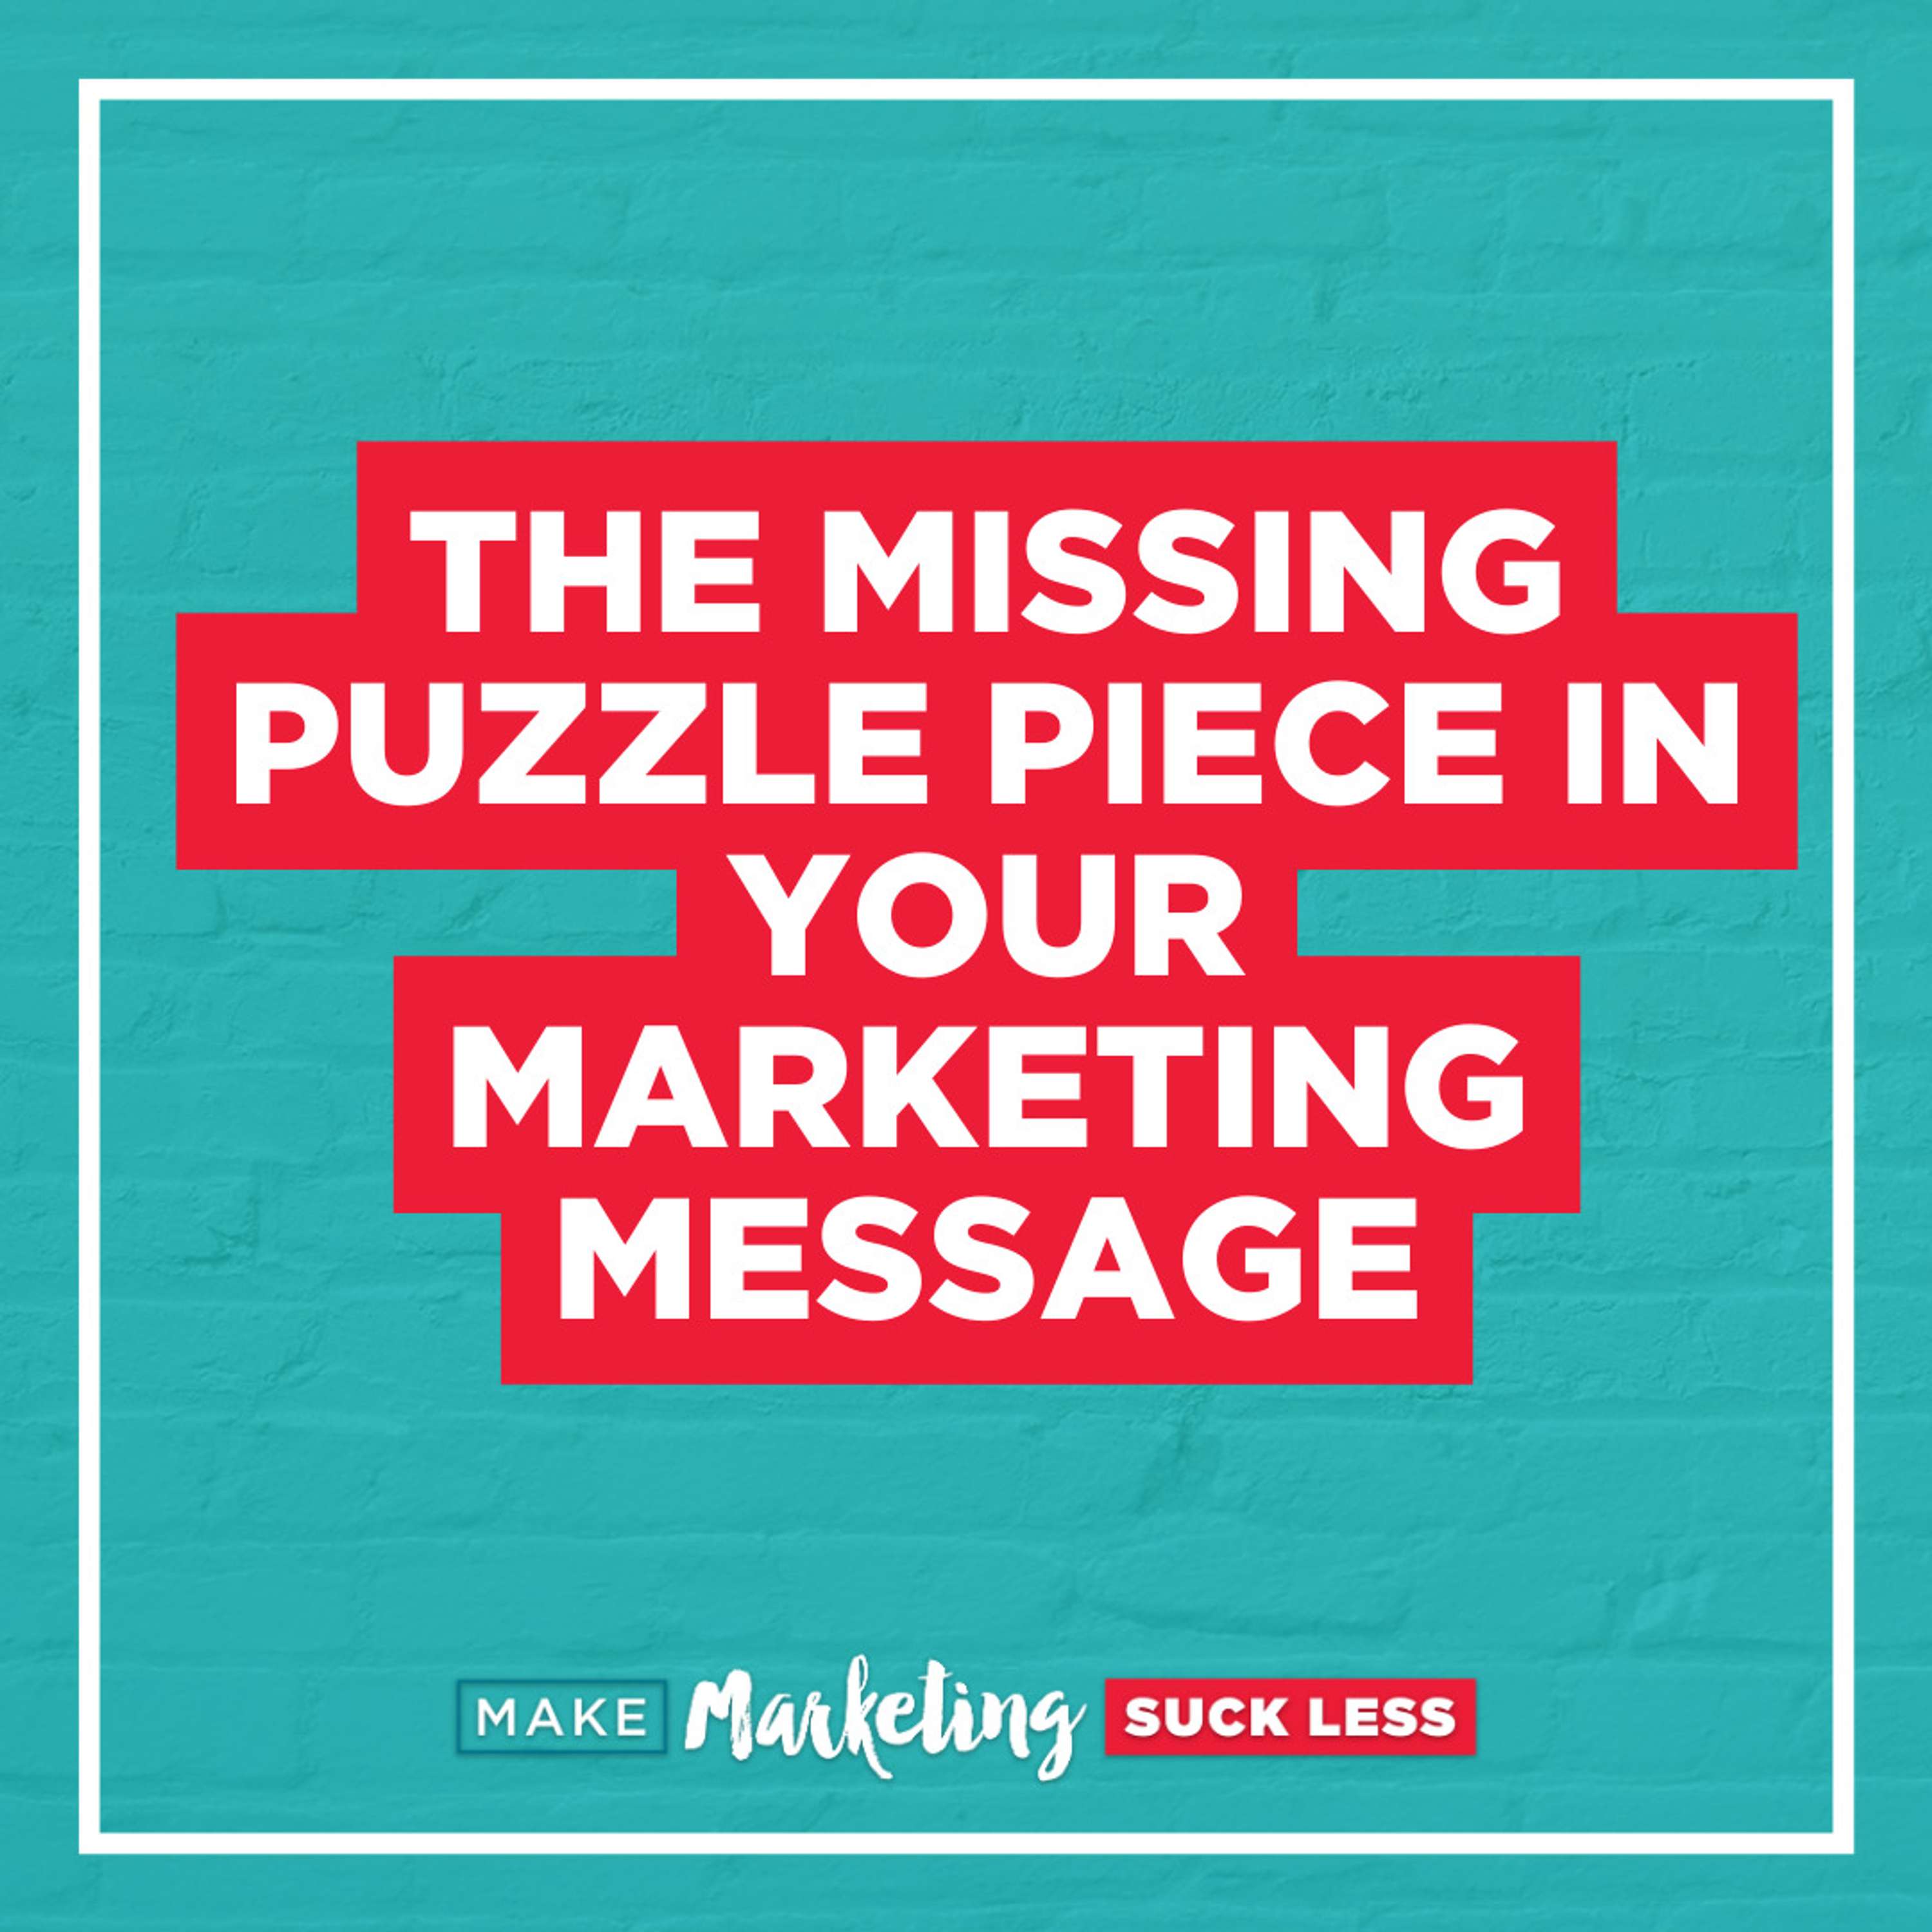 The Missing Puzzle Piece in Your Marketing Message